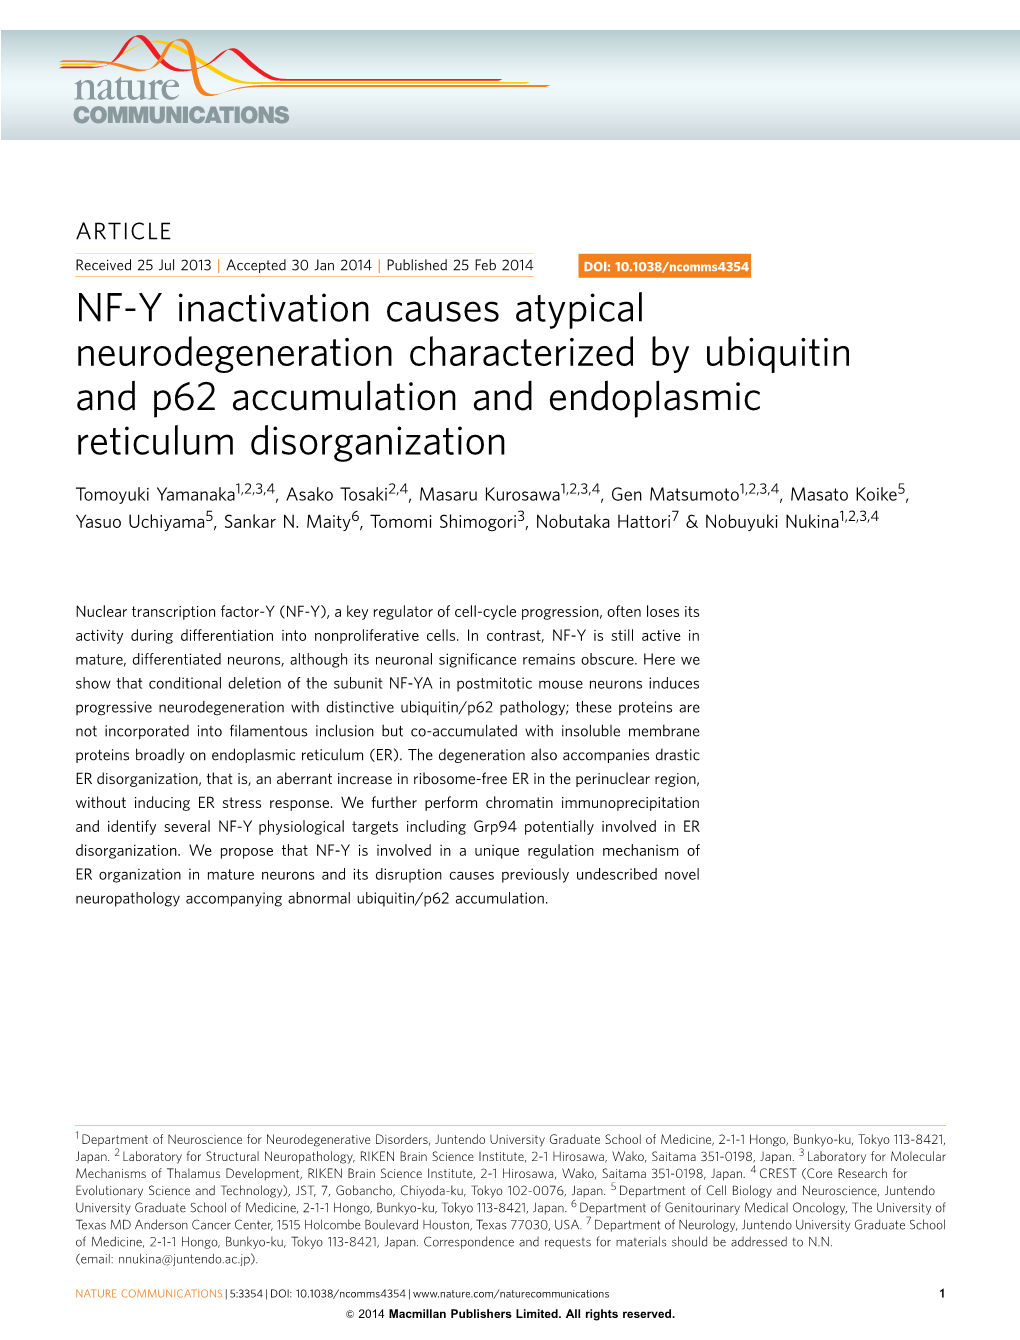 NF-Y Inactivation Causes Atypical Neurodegeneration Characterized by Ubiquitin and P62 Accumulation and Endoplasmic Reticulum Disorganization